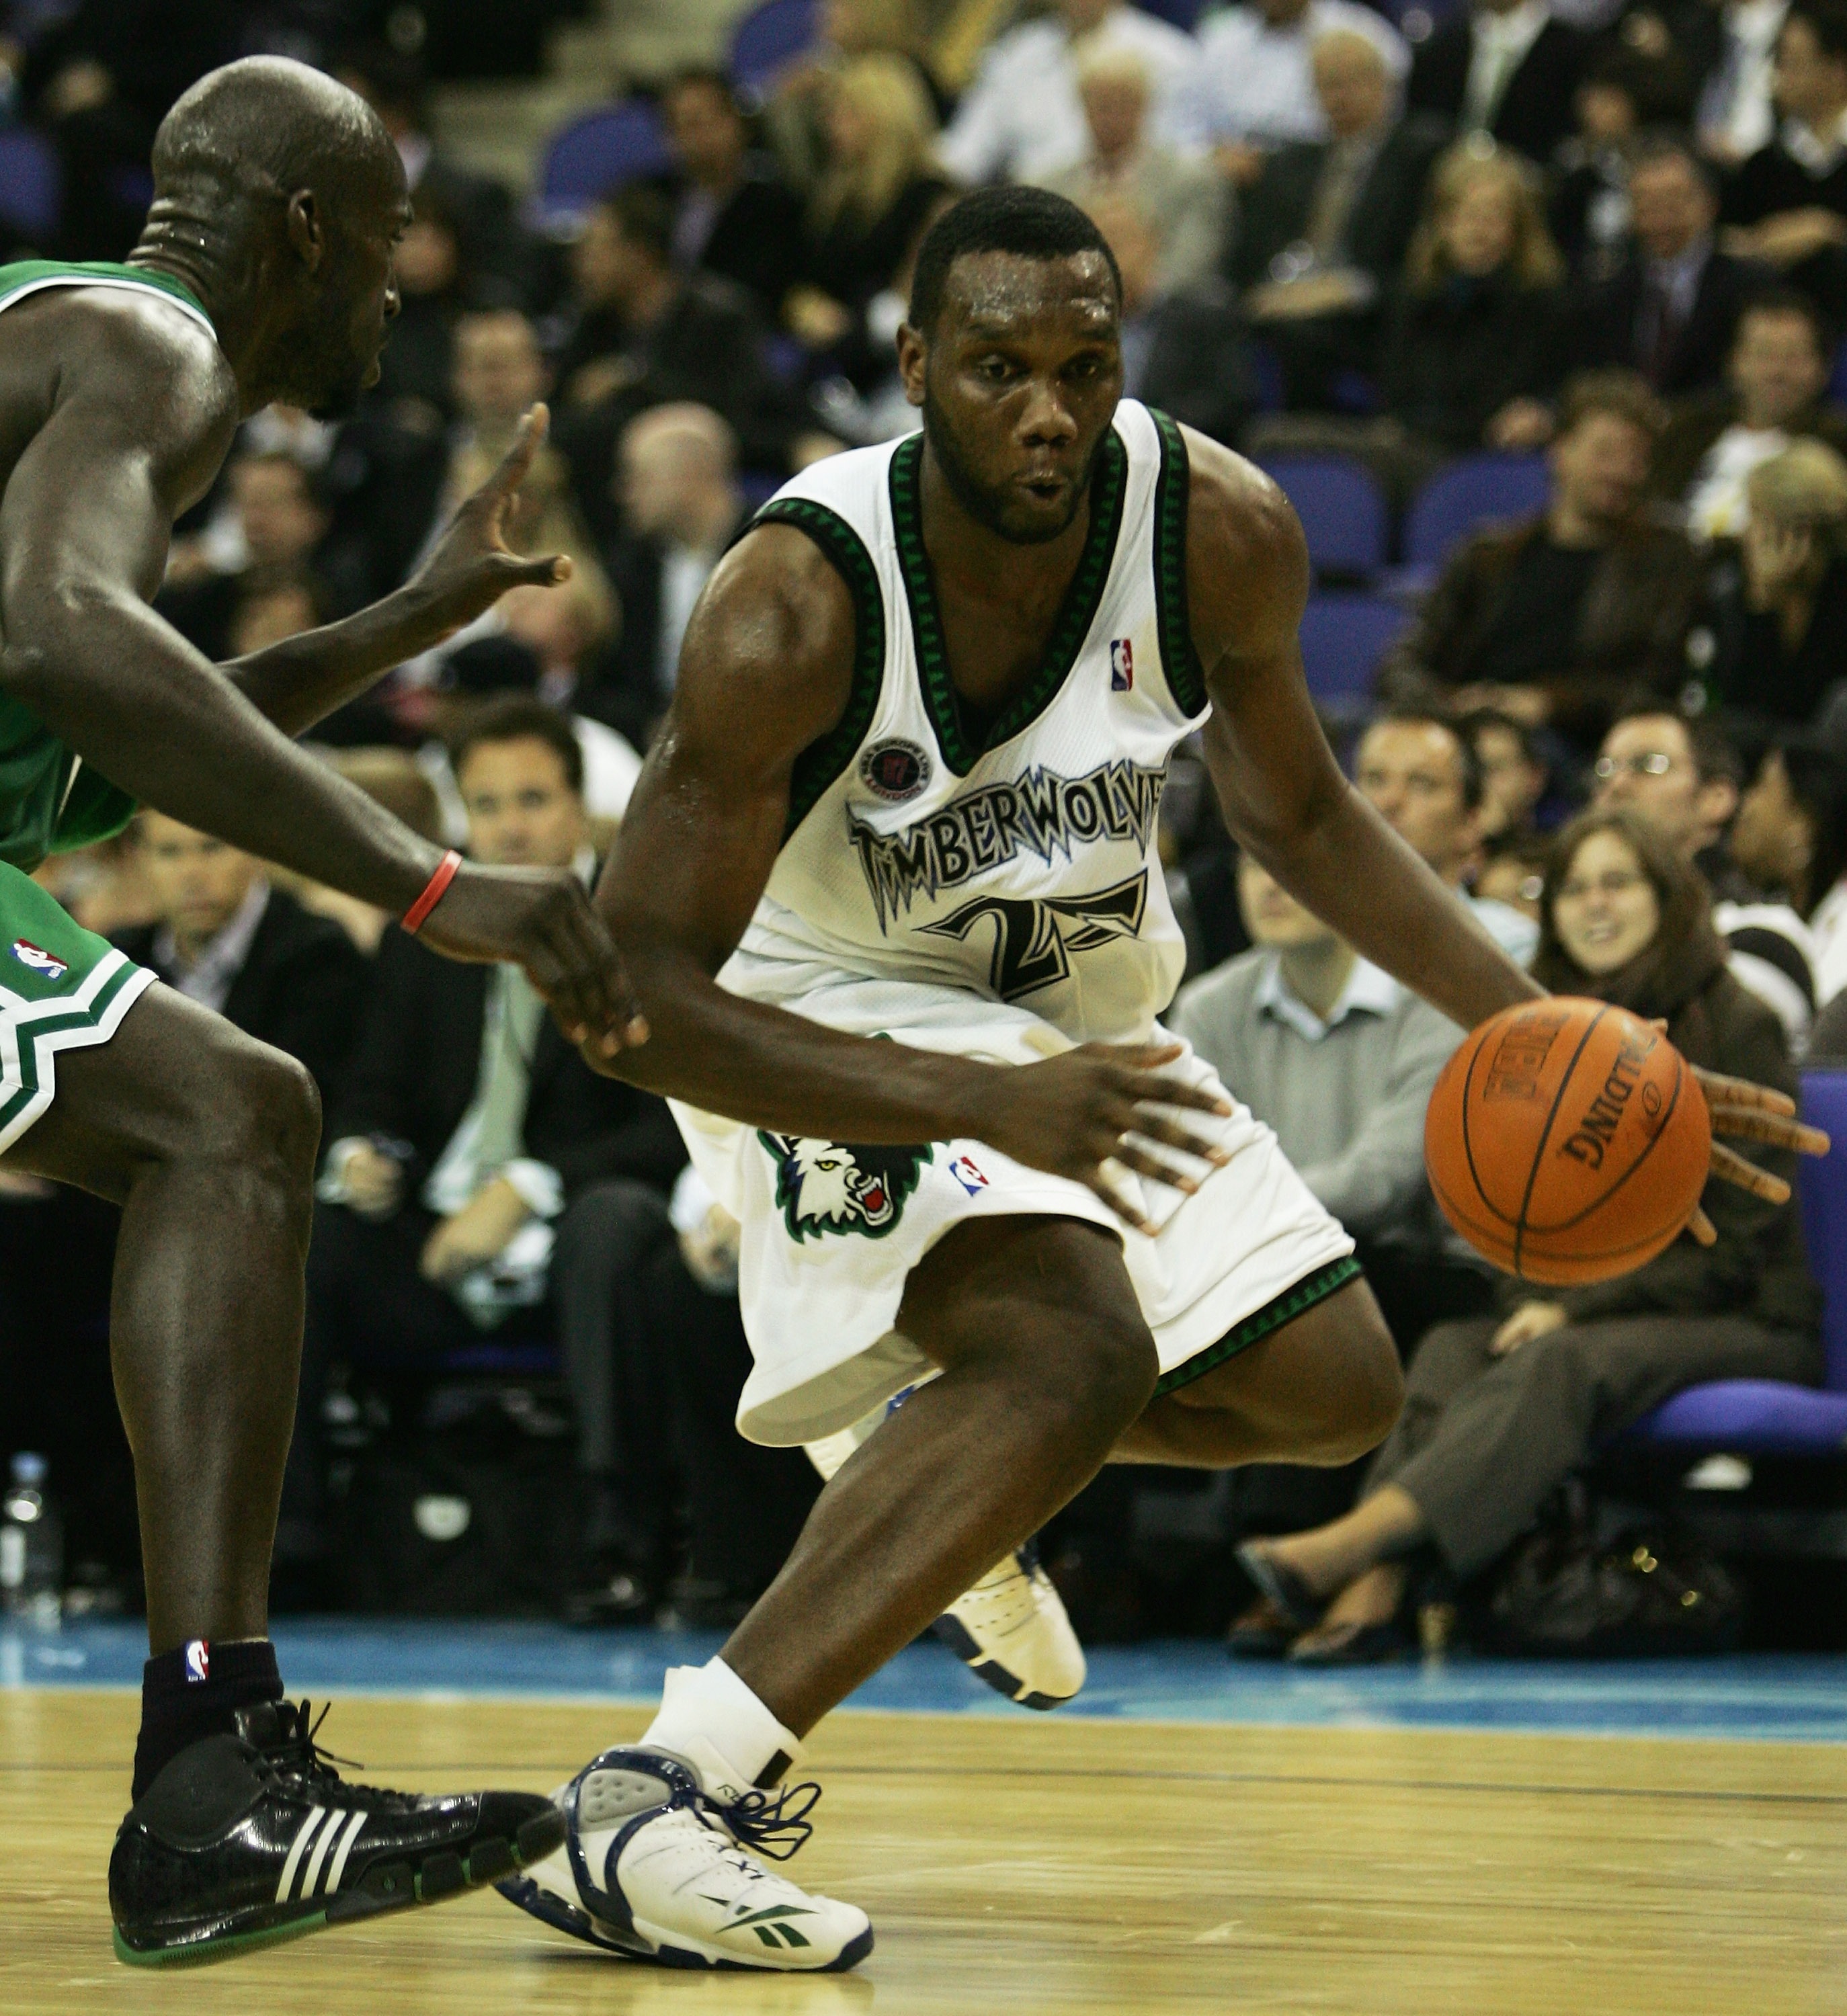 LONDON - OCTOBER 10:  Al Jefferson #25 of Minnesota is challenged by Kevin Garnett (L) of Boston during NBA Europe Live 2007 Tour match between the Boston Celtics and the Minnesota Timberwolves at the O2 Arena on October 10, 2007 in London, England.  NOTE